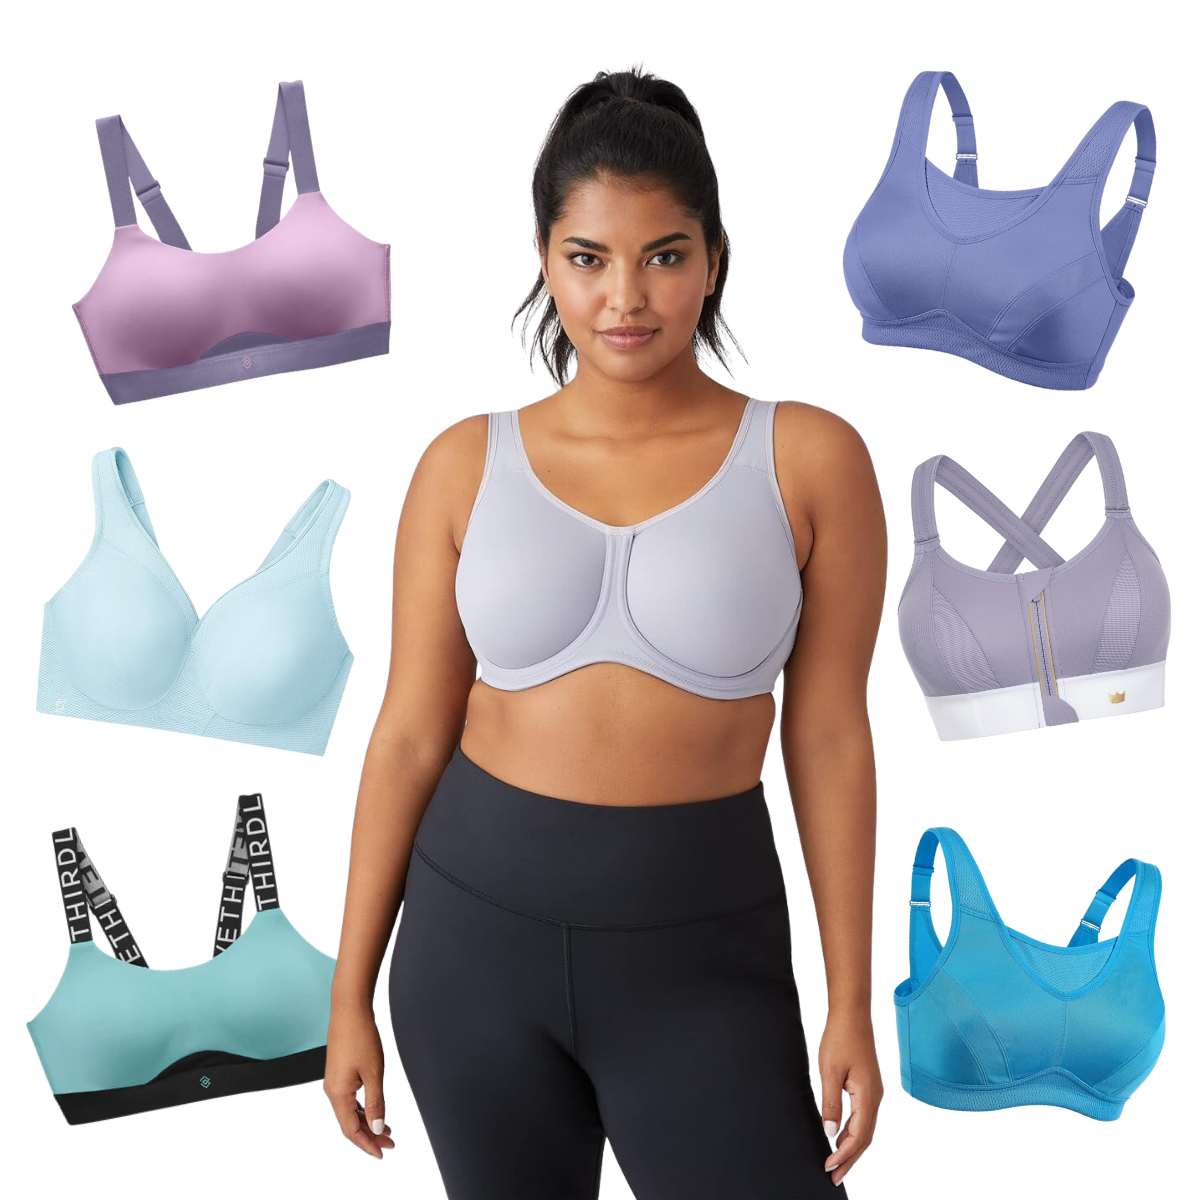 The Top 10 Most Comfortable Sports Bras – As Voted for by You